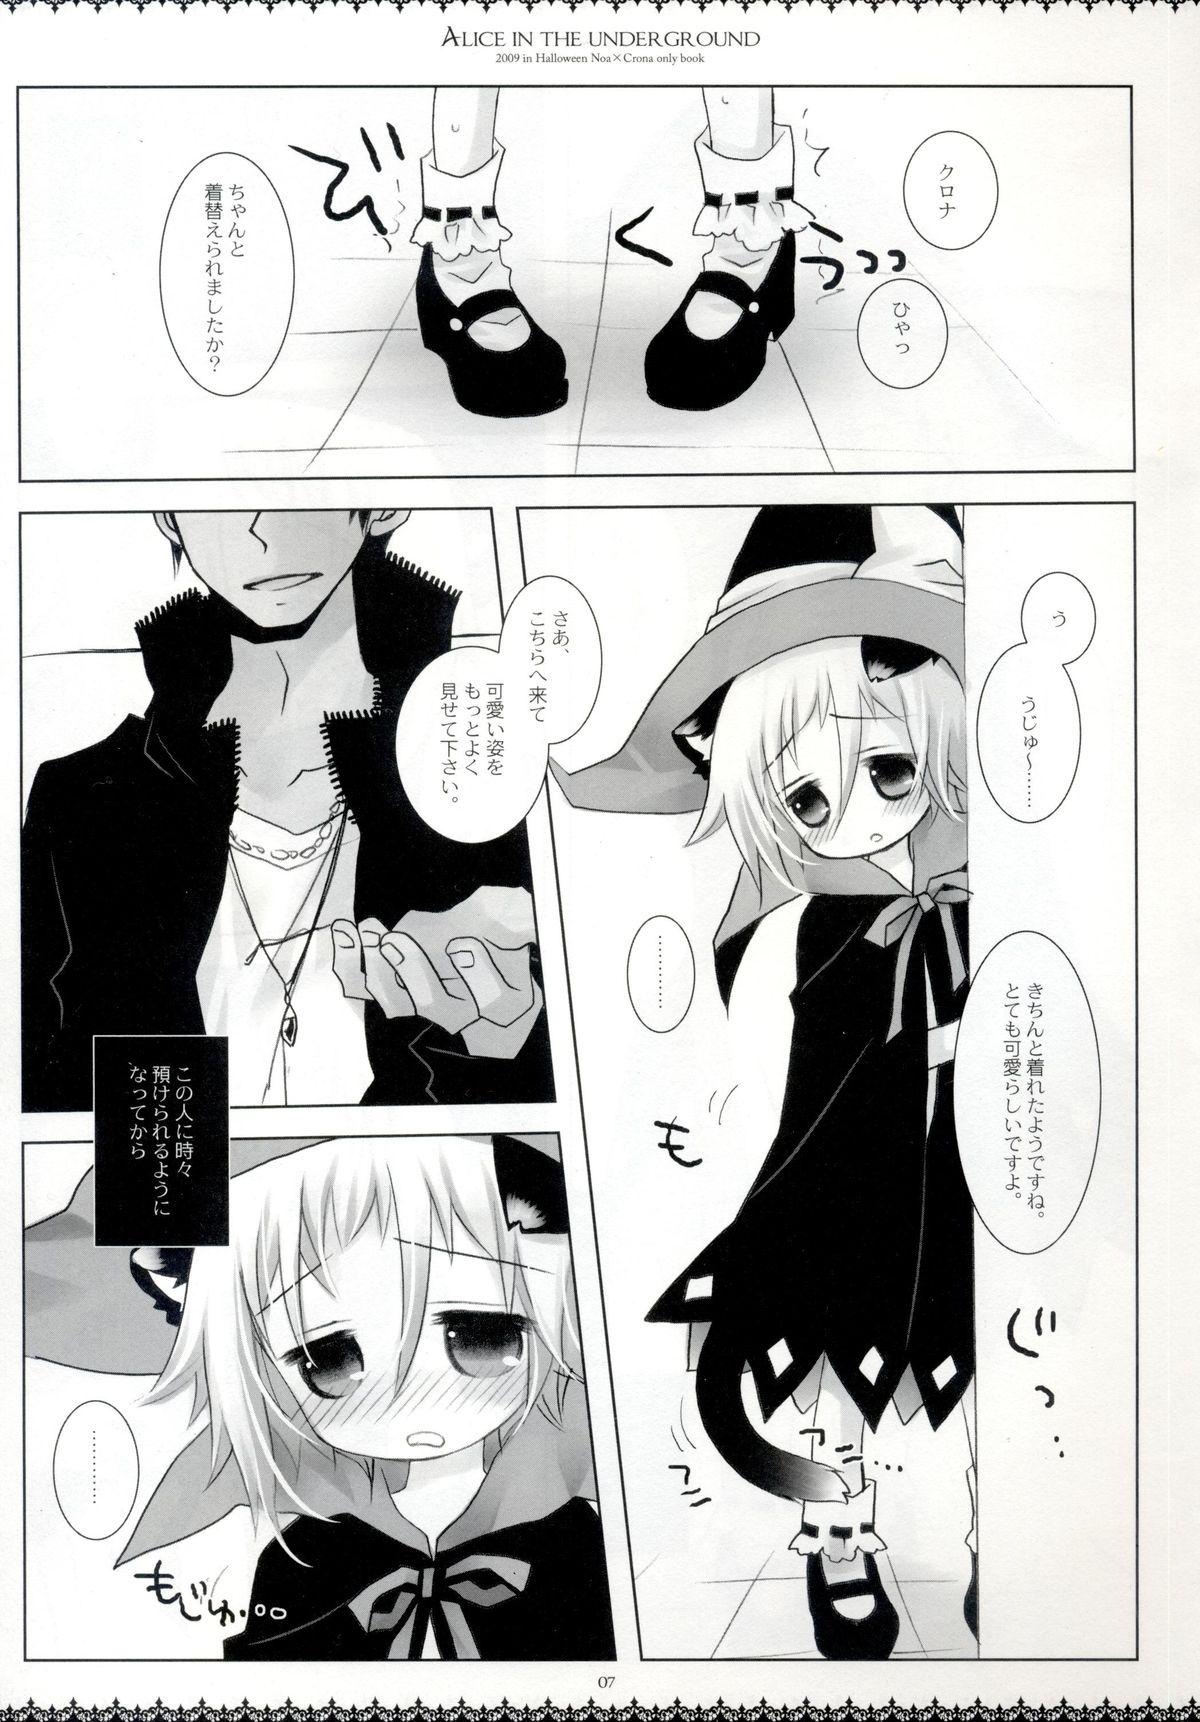 Hardcore Fuck Alice in the underground - Soul eater British - Page 6